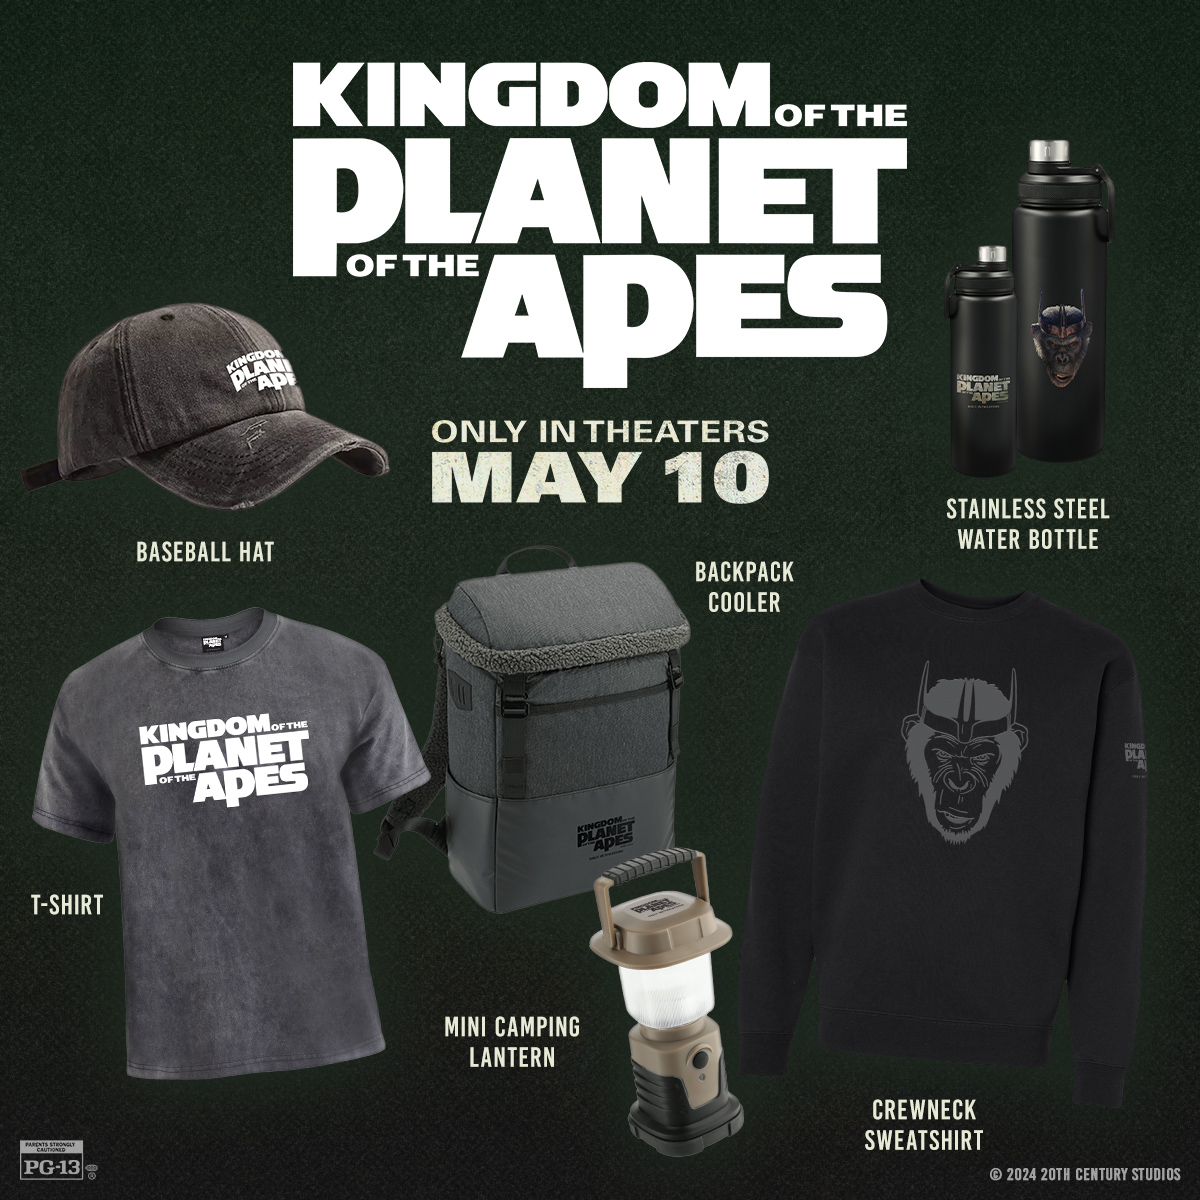 RT & follow to enter to win this #KingdomOfThePlanetOfTheApes prize pack! Special Early Access #IMAX show tonight at 7 pm! Click for showtimes and to reserve your seats - bit.ly/TCLKOTPA_IMAXE…